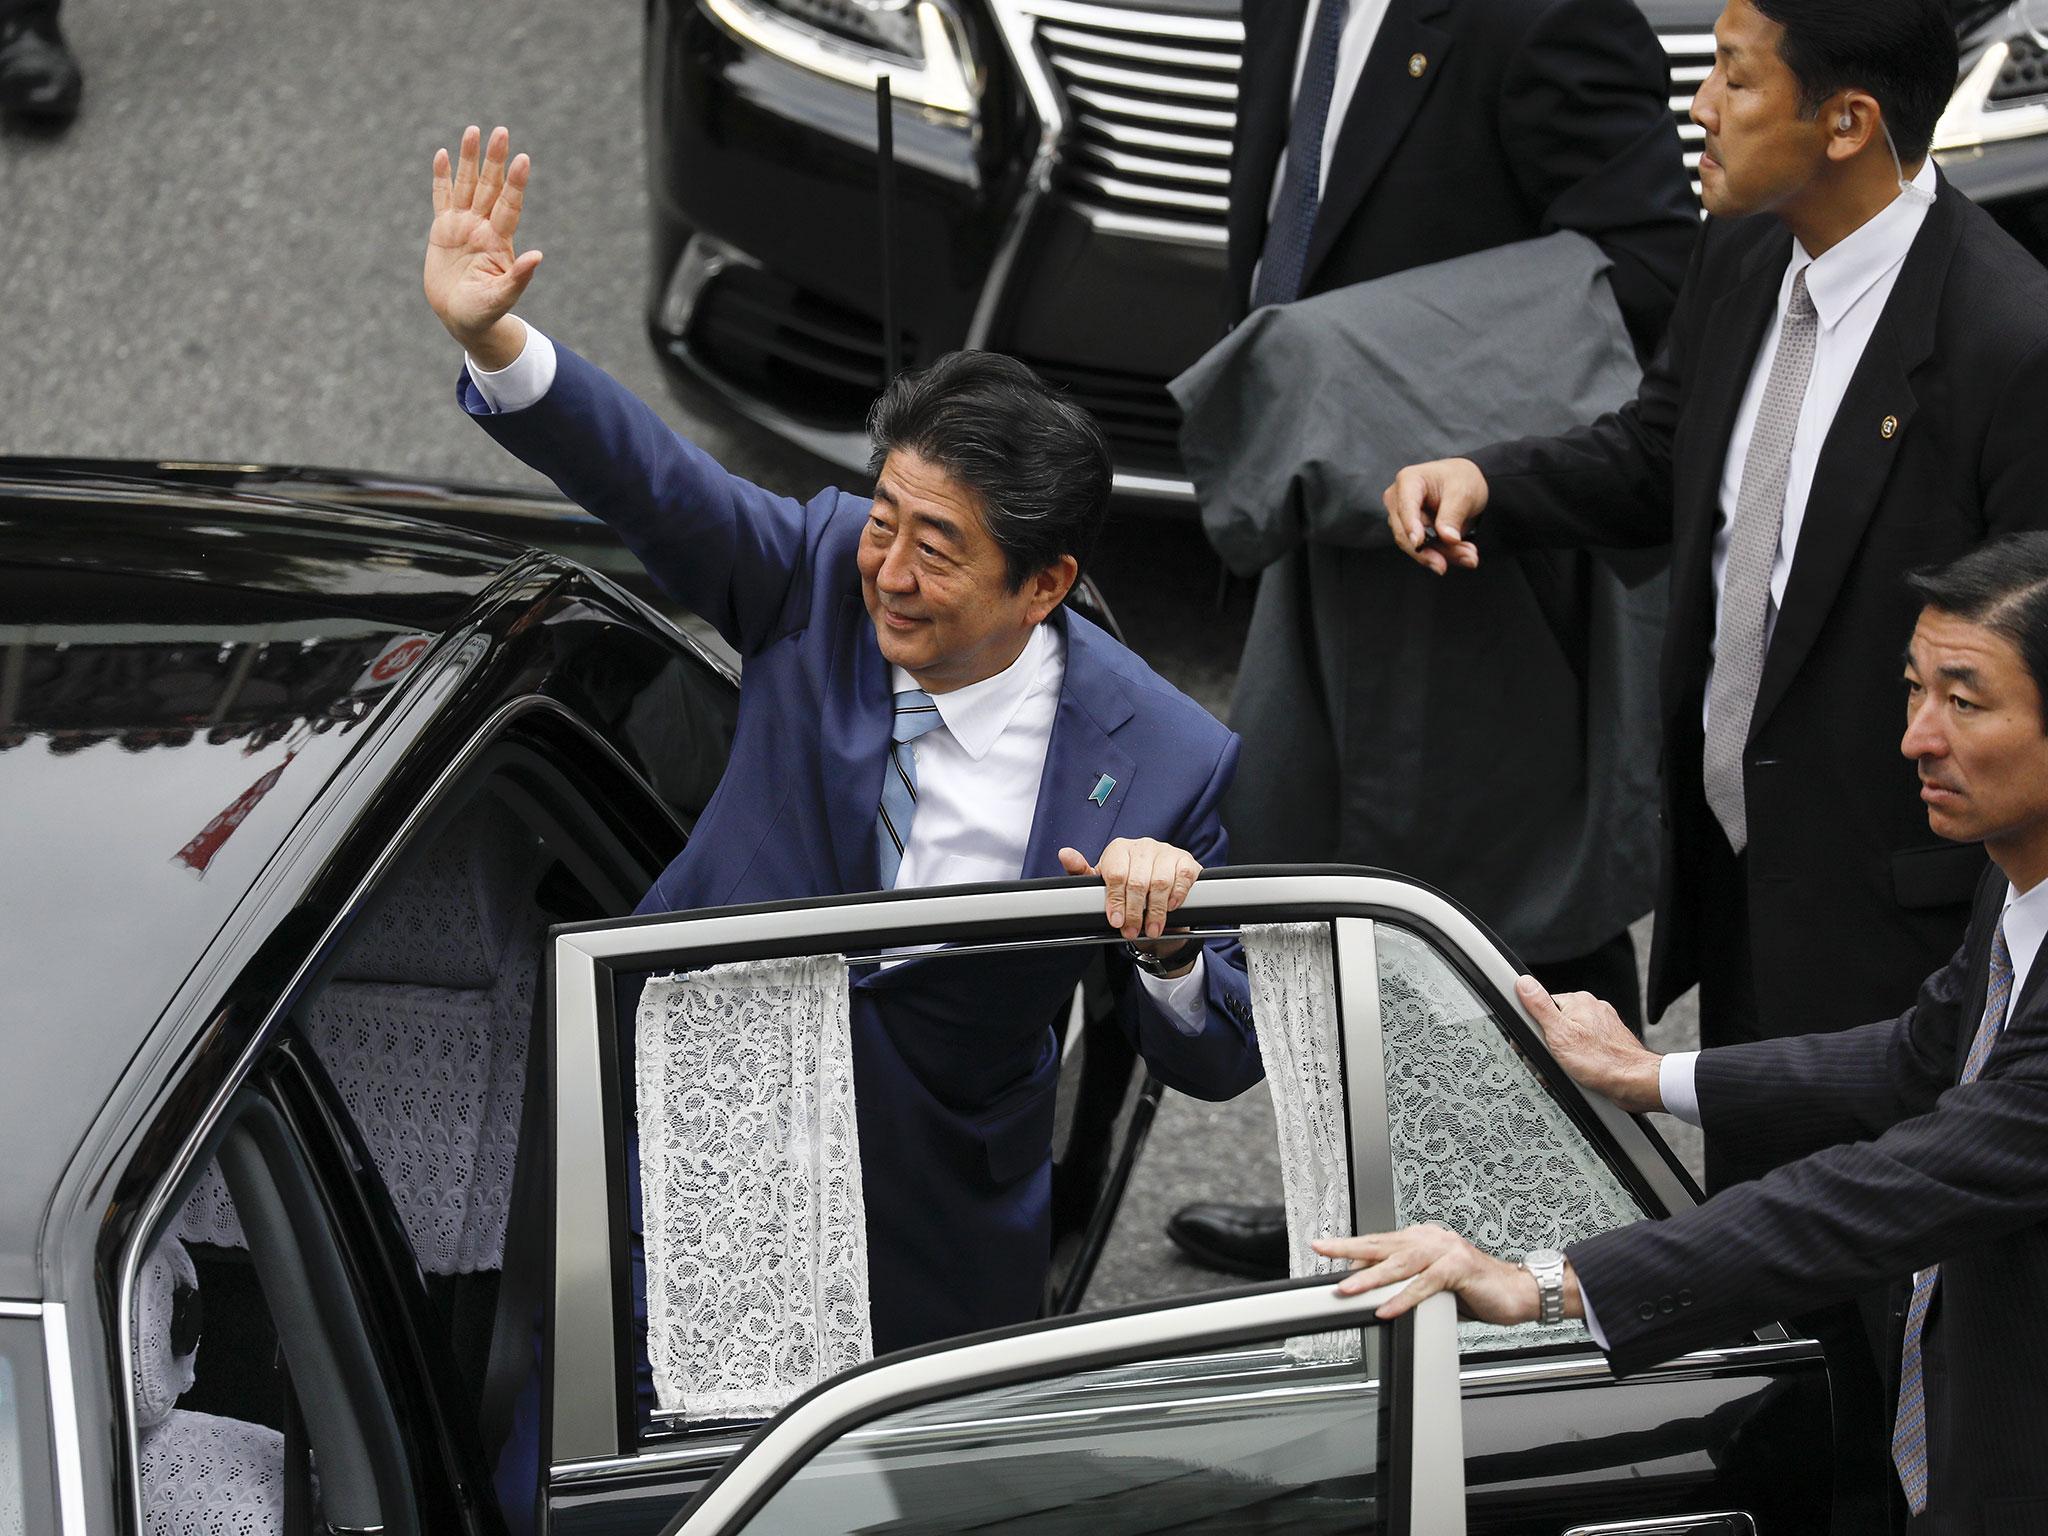 Abe has learned from his first disastrous stint as Prime Minister and proven himself to be a political survivor